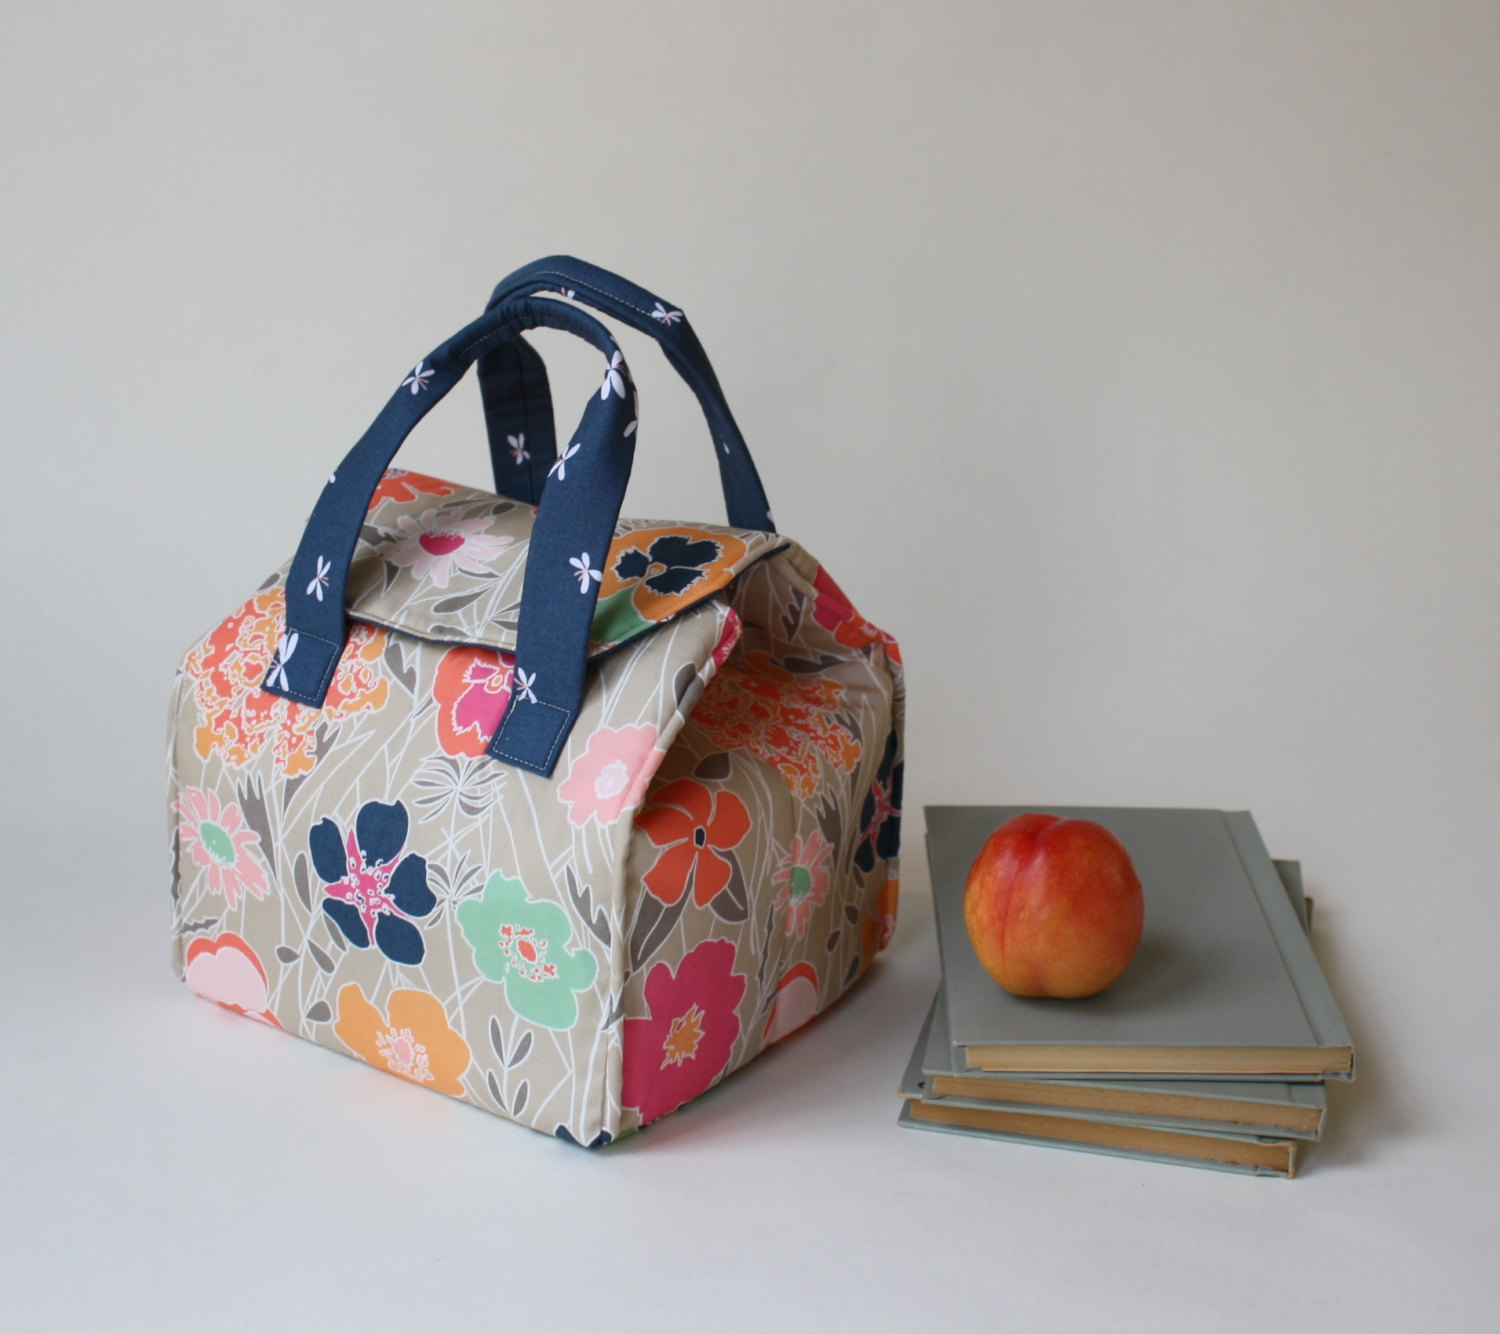 Insulated Lunch Bag in Floral and Firefies - Insulated Lunch Tote - Bento Box Carrier - Ready to Ship